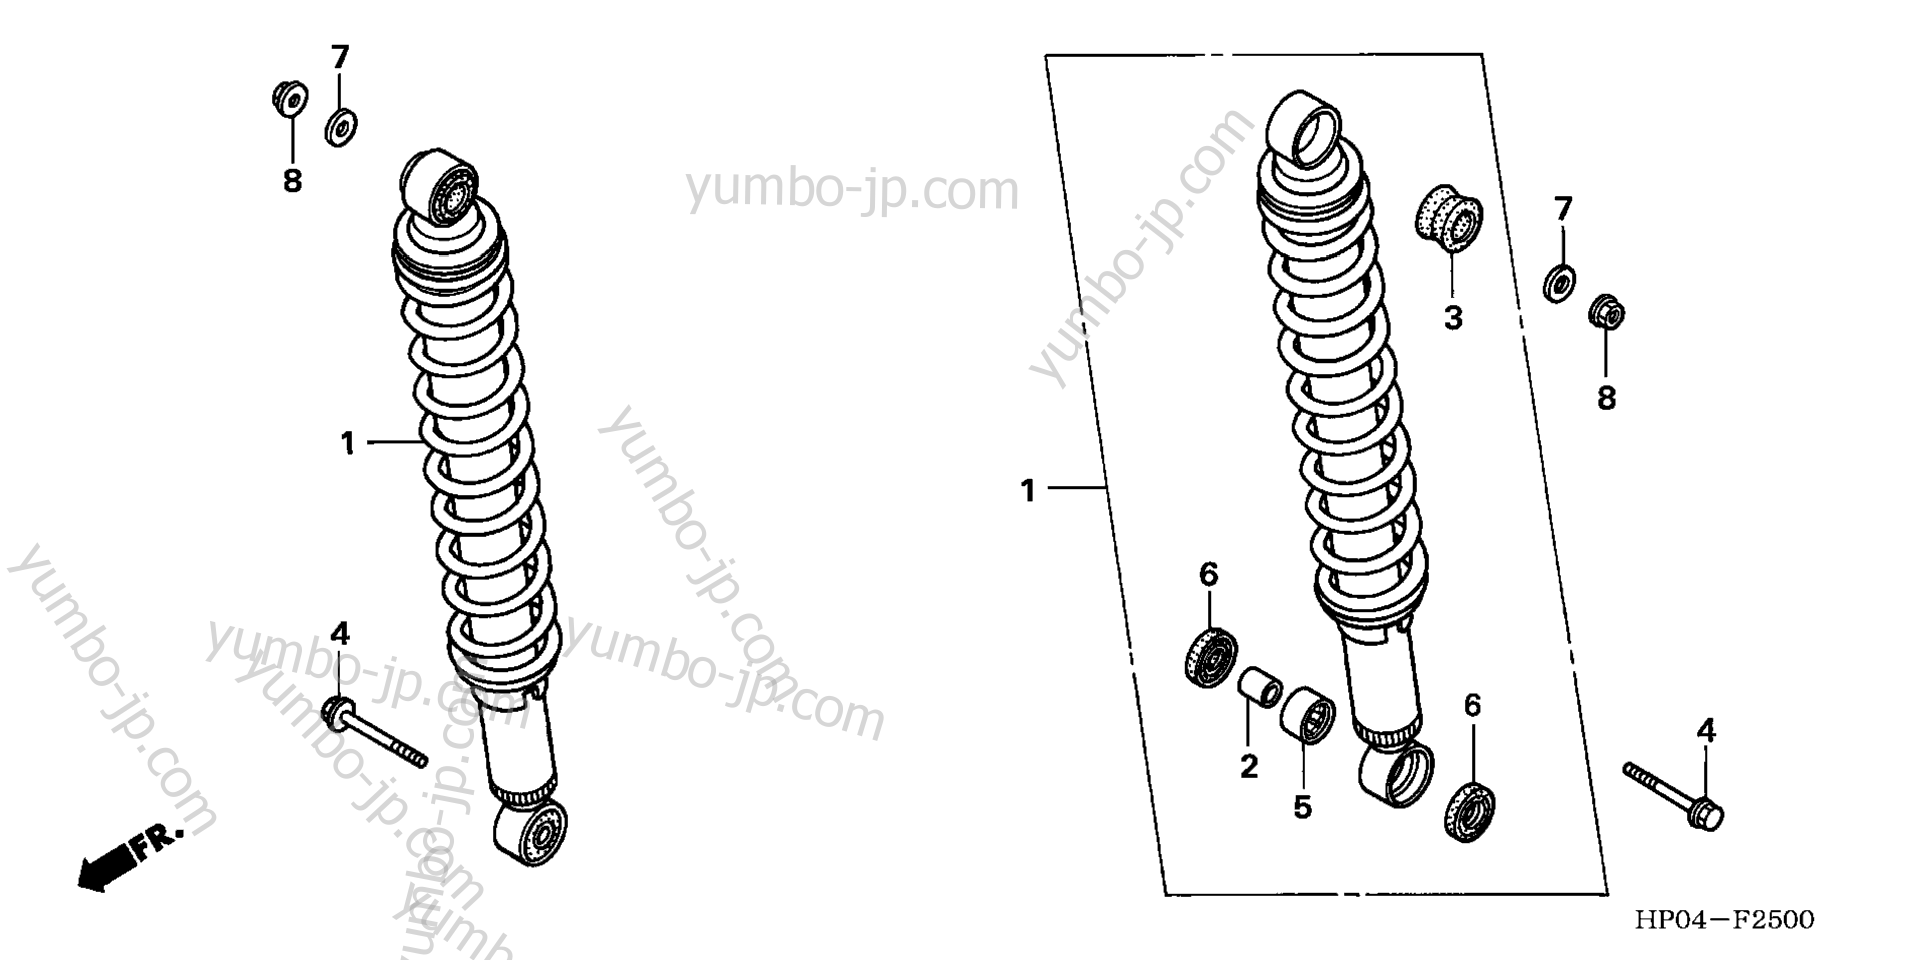 REAR SHOCK ABSORBER for ATVs HONDA TRX500FM A 2006 year